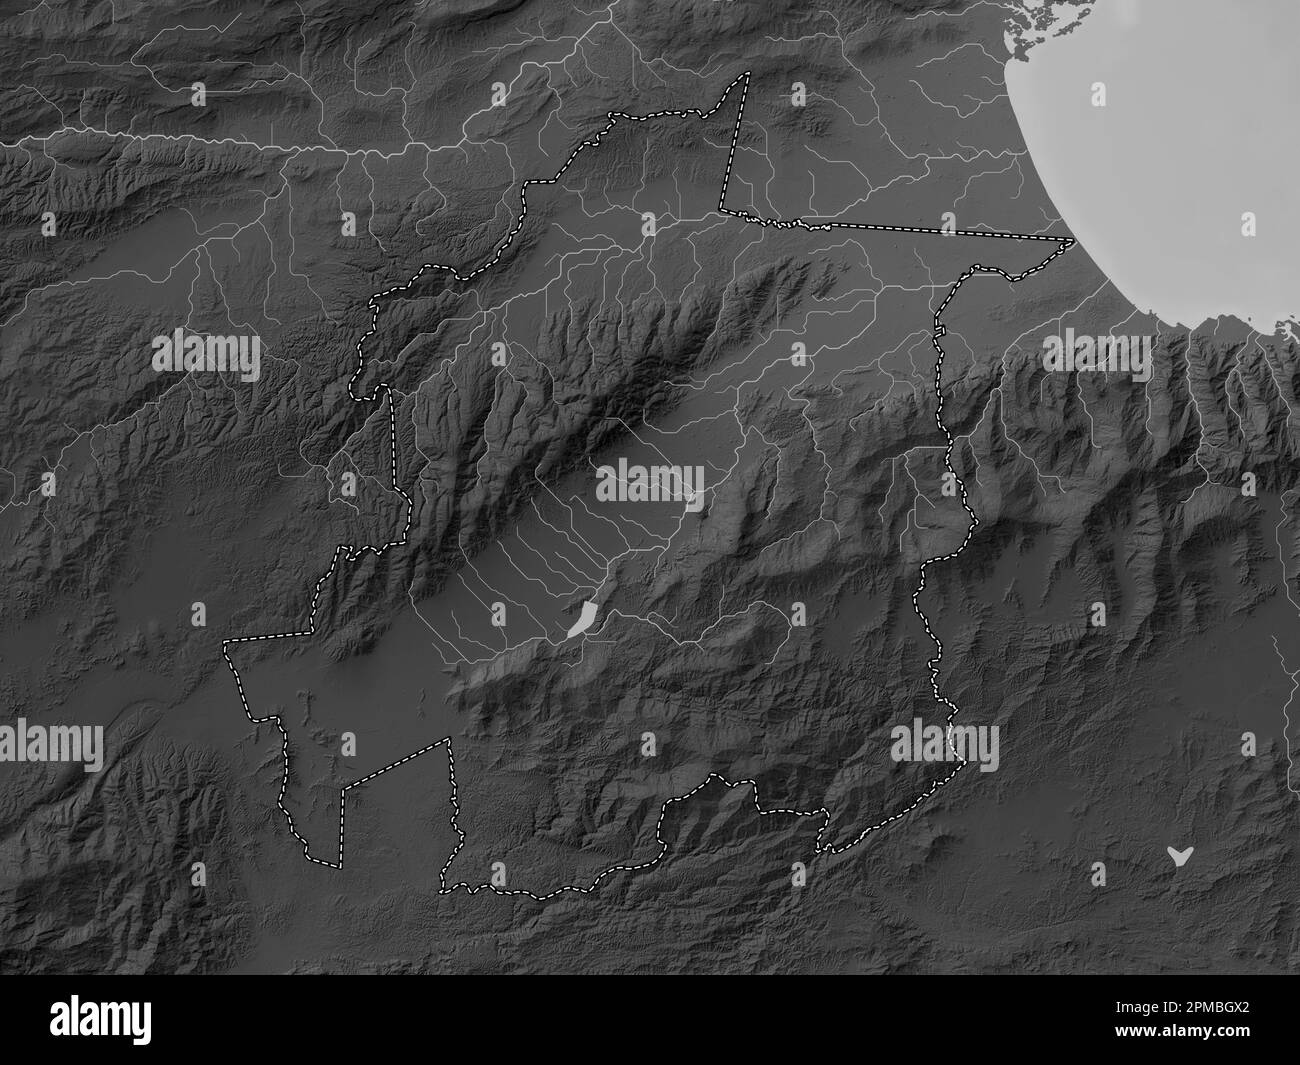 Yaracuy, state of Venezuela. Grayscale elevation map with lakes and rivers Stock Photo